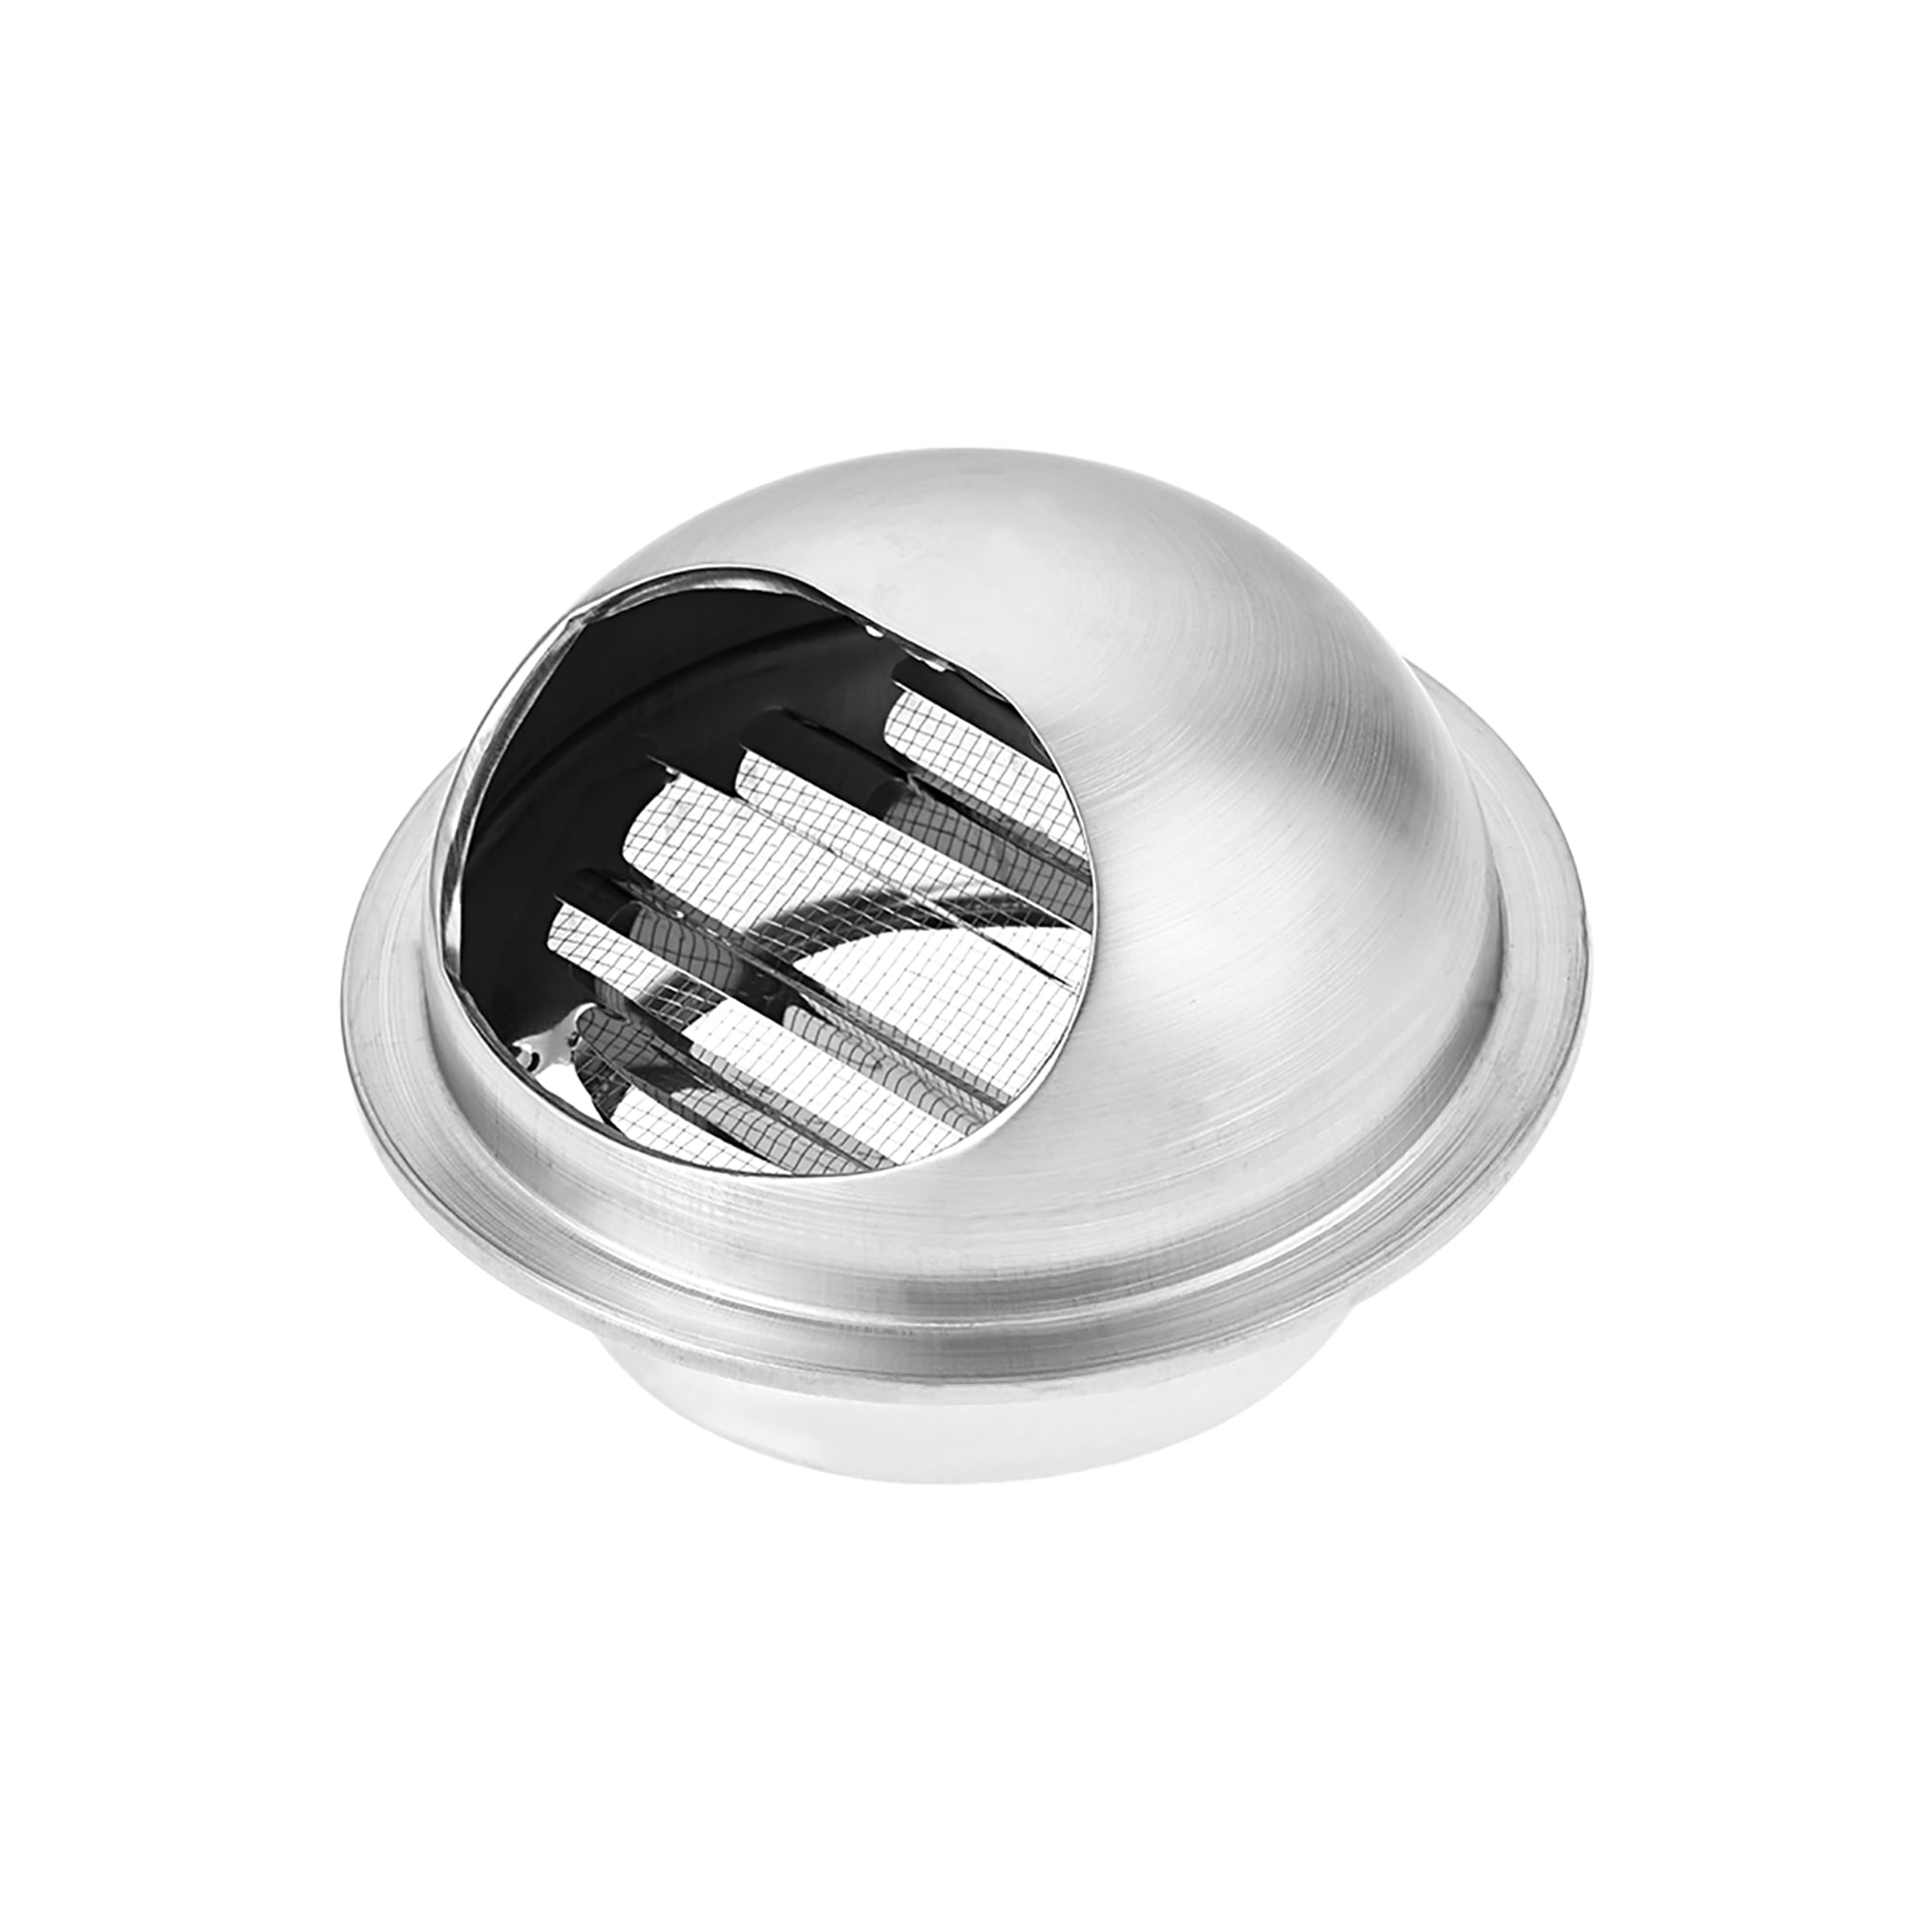 Spherical Air Vent 4 Inch 100 mm Stainless Steel Ducting Ventilation ...